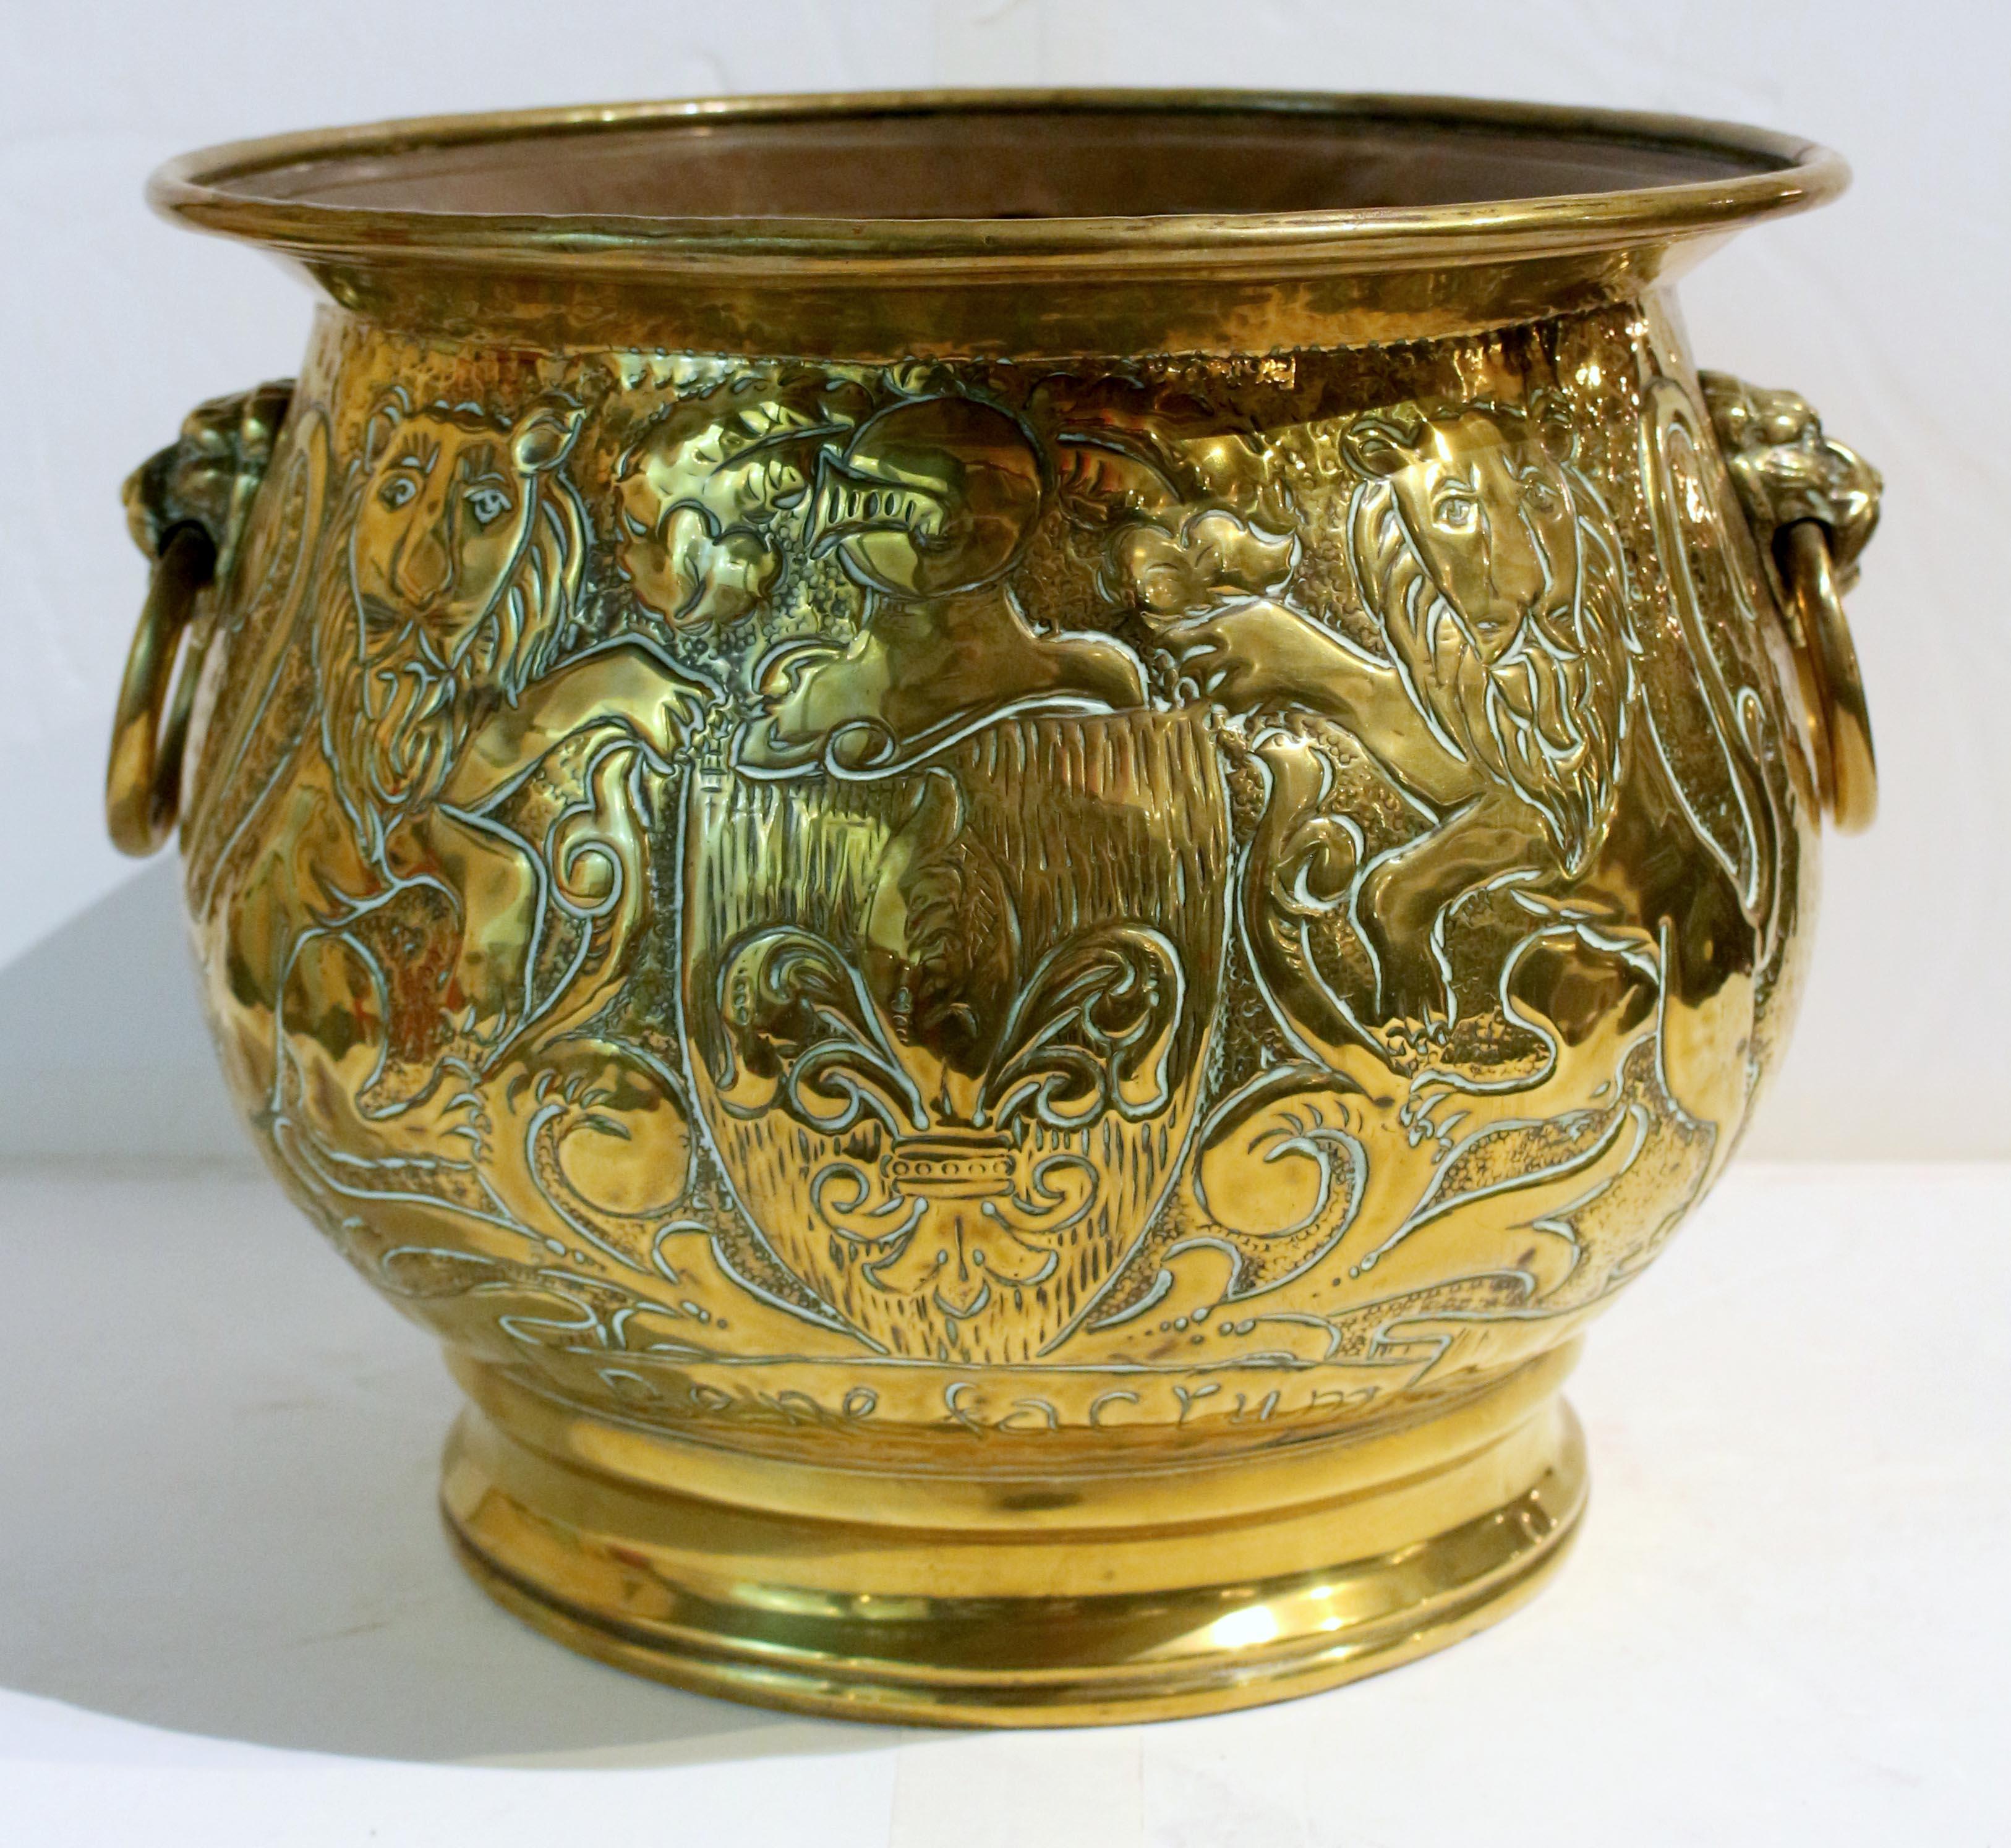 Circa 1880 round brass handled jardiniere, English. Very well decorated with rampant lions flanking a crest with knight's helmet surmounting a shield with fleur de lys with 